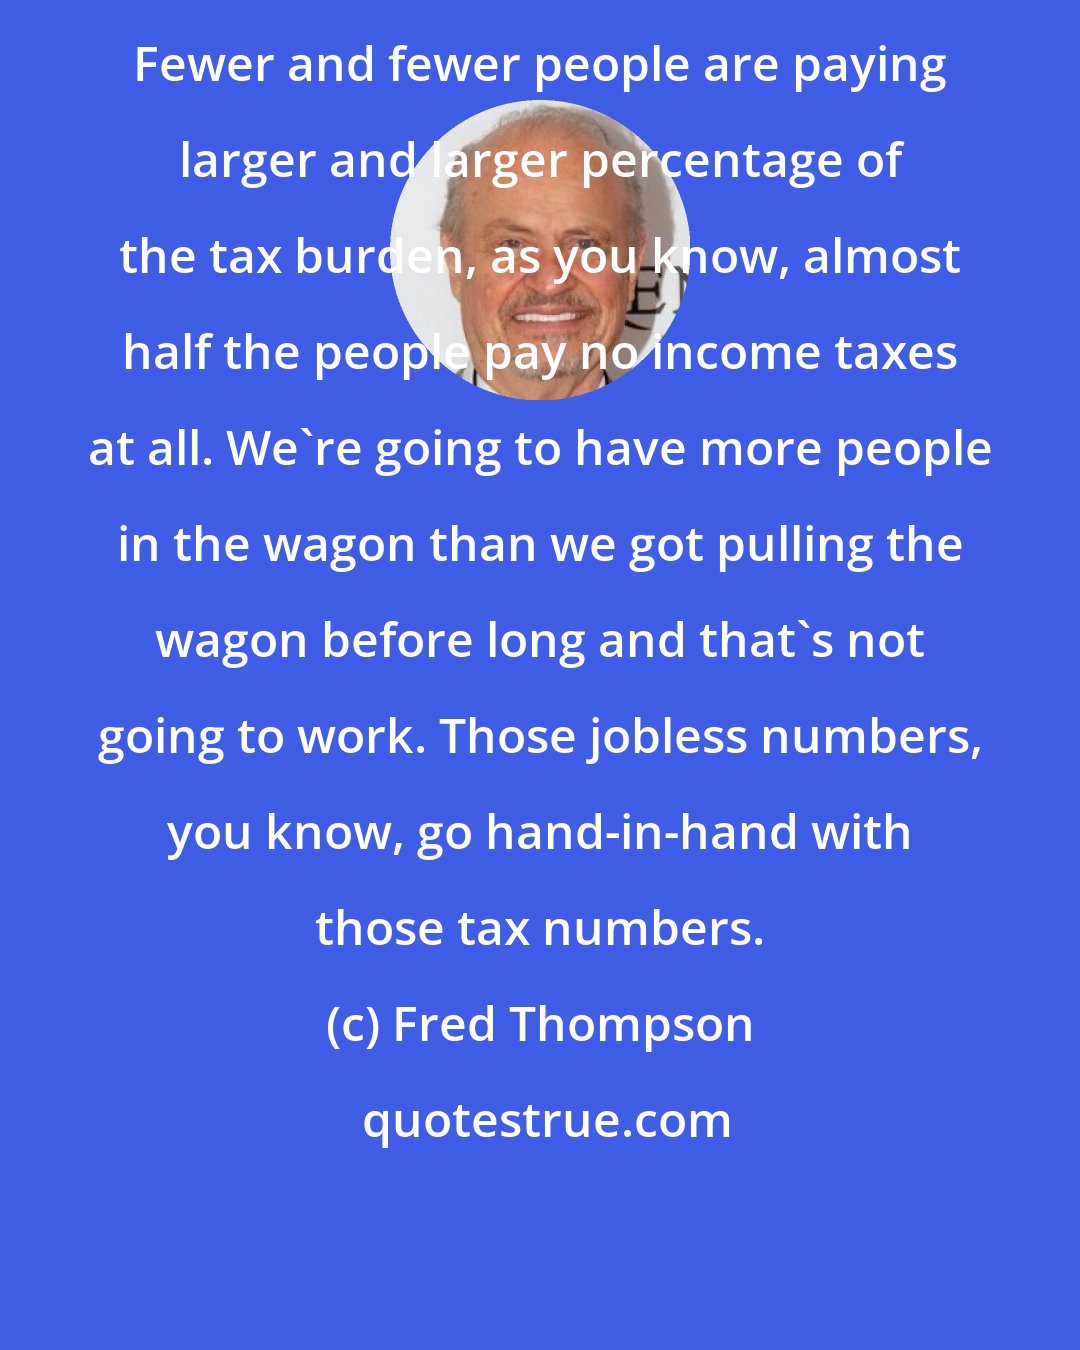 Fred Thompson: Fewer and fewer people are paying larger and larger percentage of the tax burden, as you know, almost half the people pay no income taxes at all. We're going to have more people in the wagon than we got pulling the wagon before long and that's not going to work. Those jobless numbers, you know, go hand-in-hand with those tax numbers.